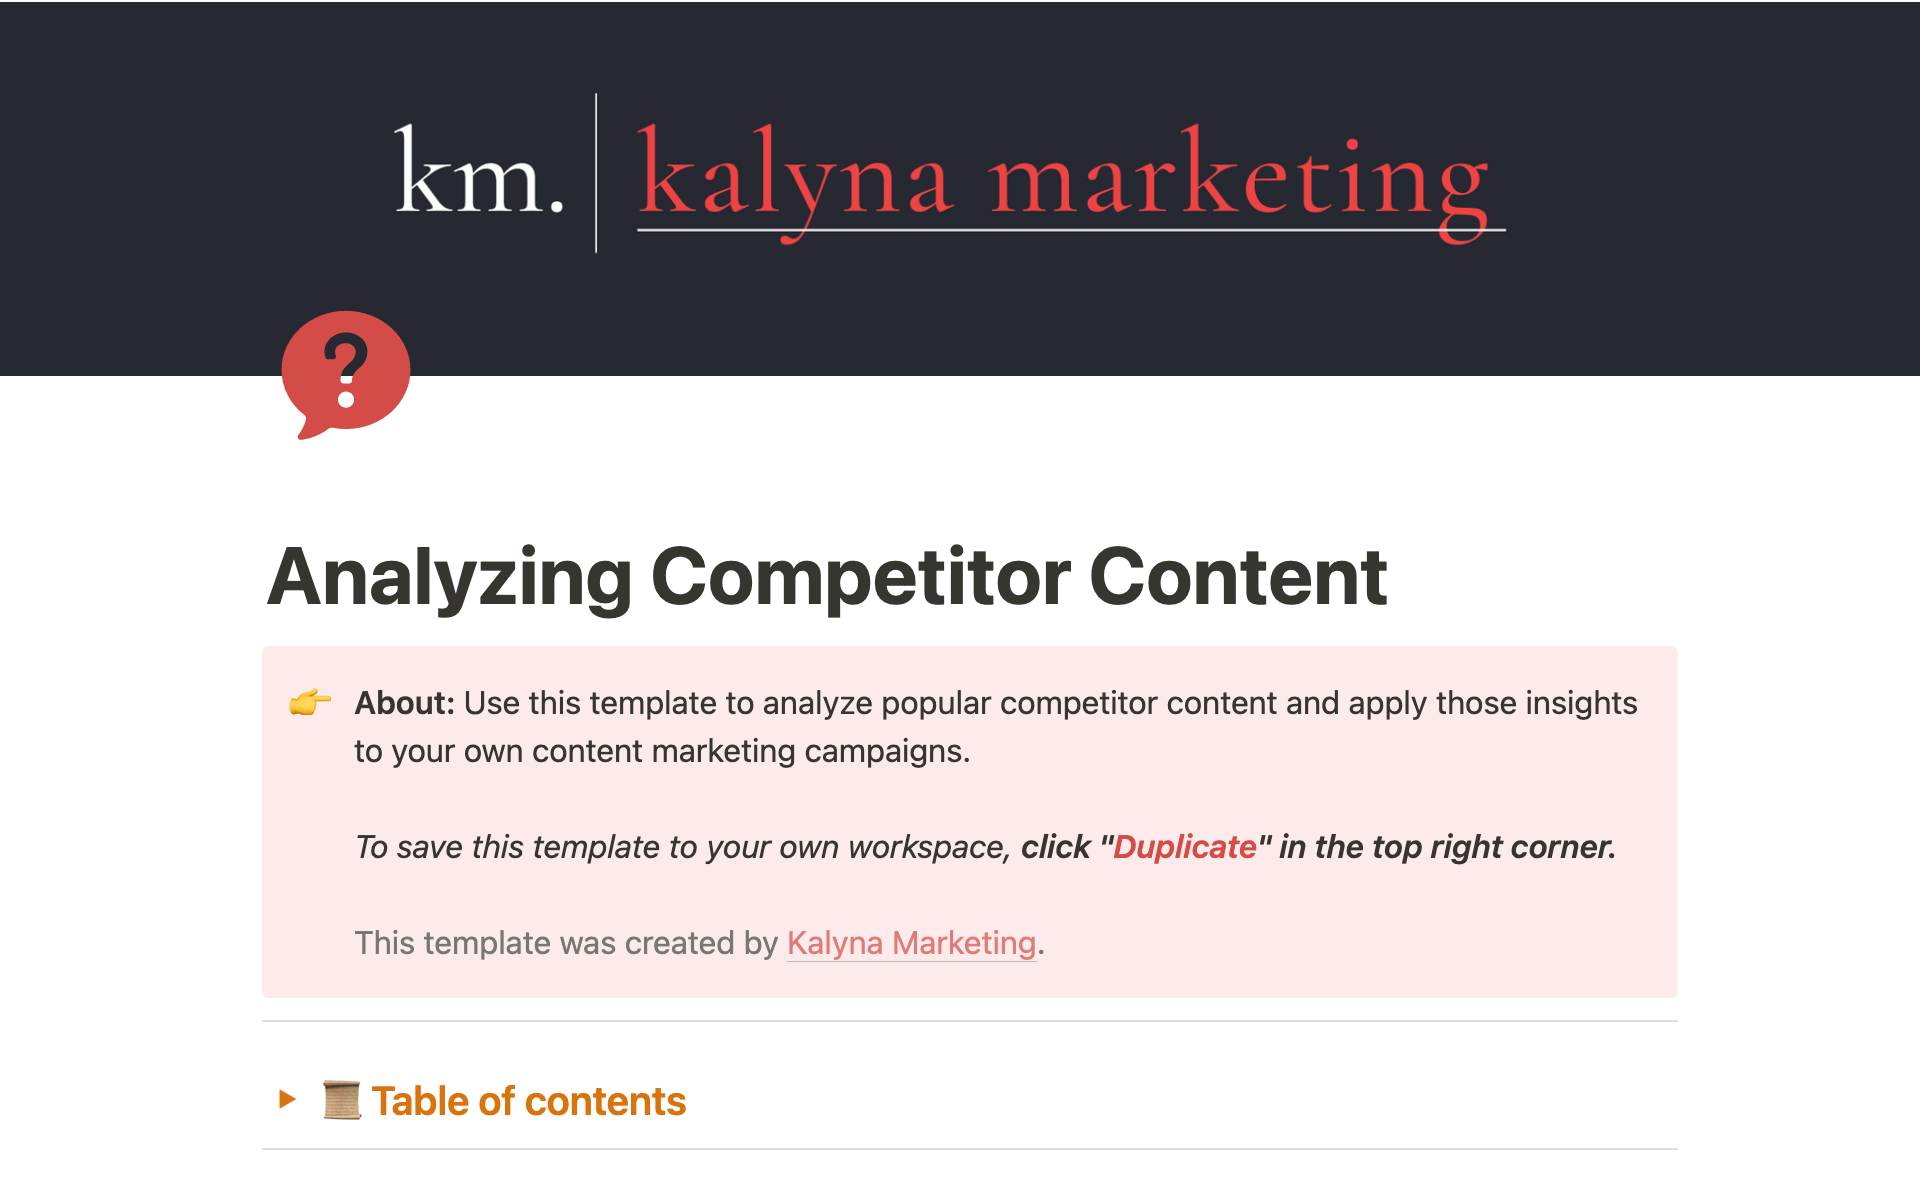 Analyze popular competitor content and apply those insights to your own content marketing campaigns.